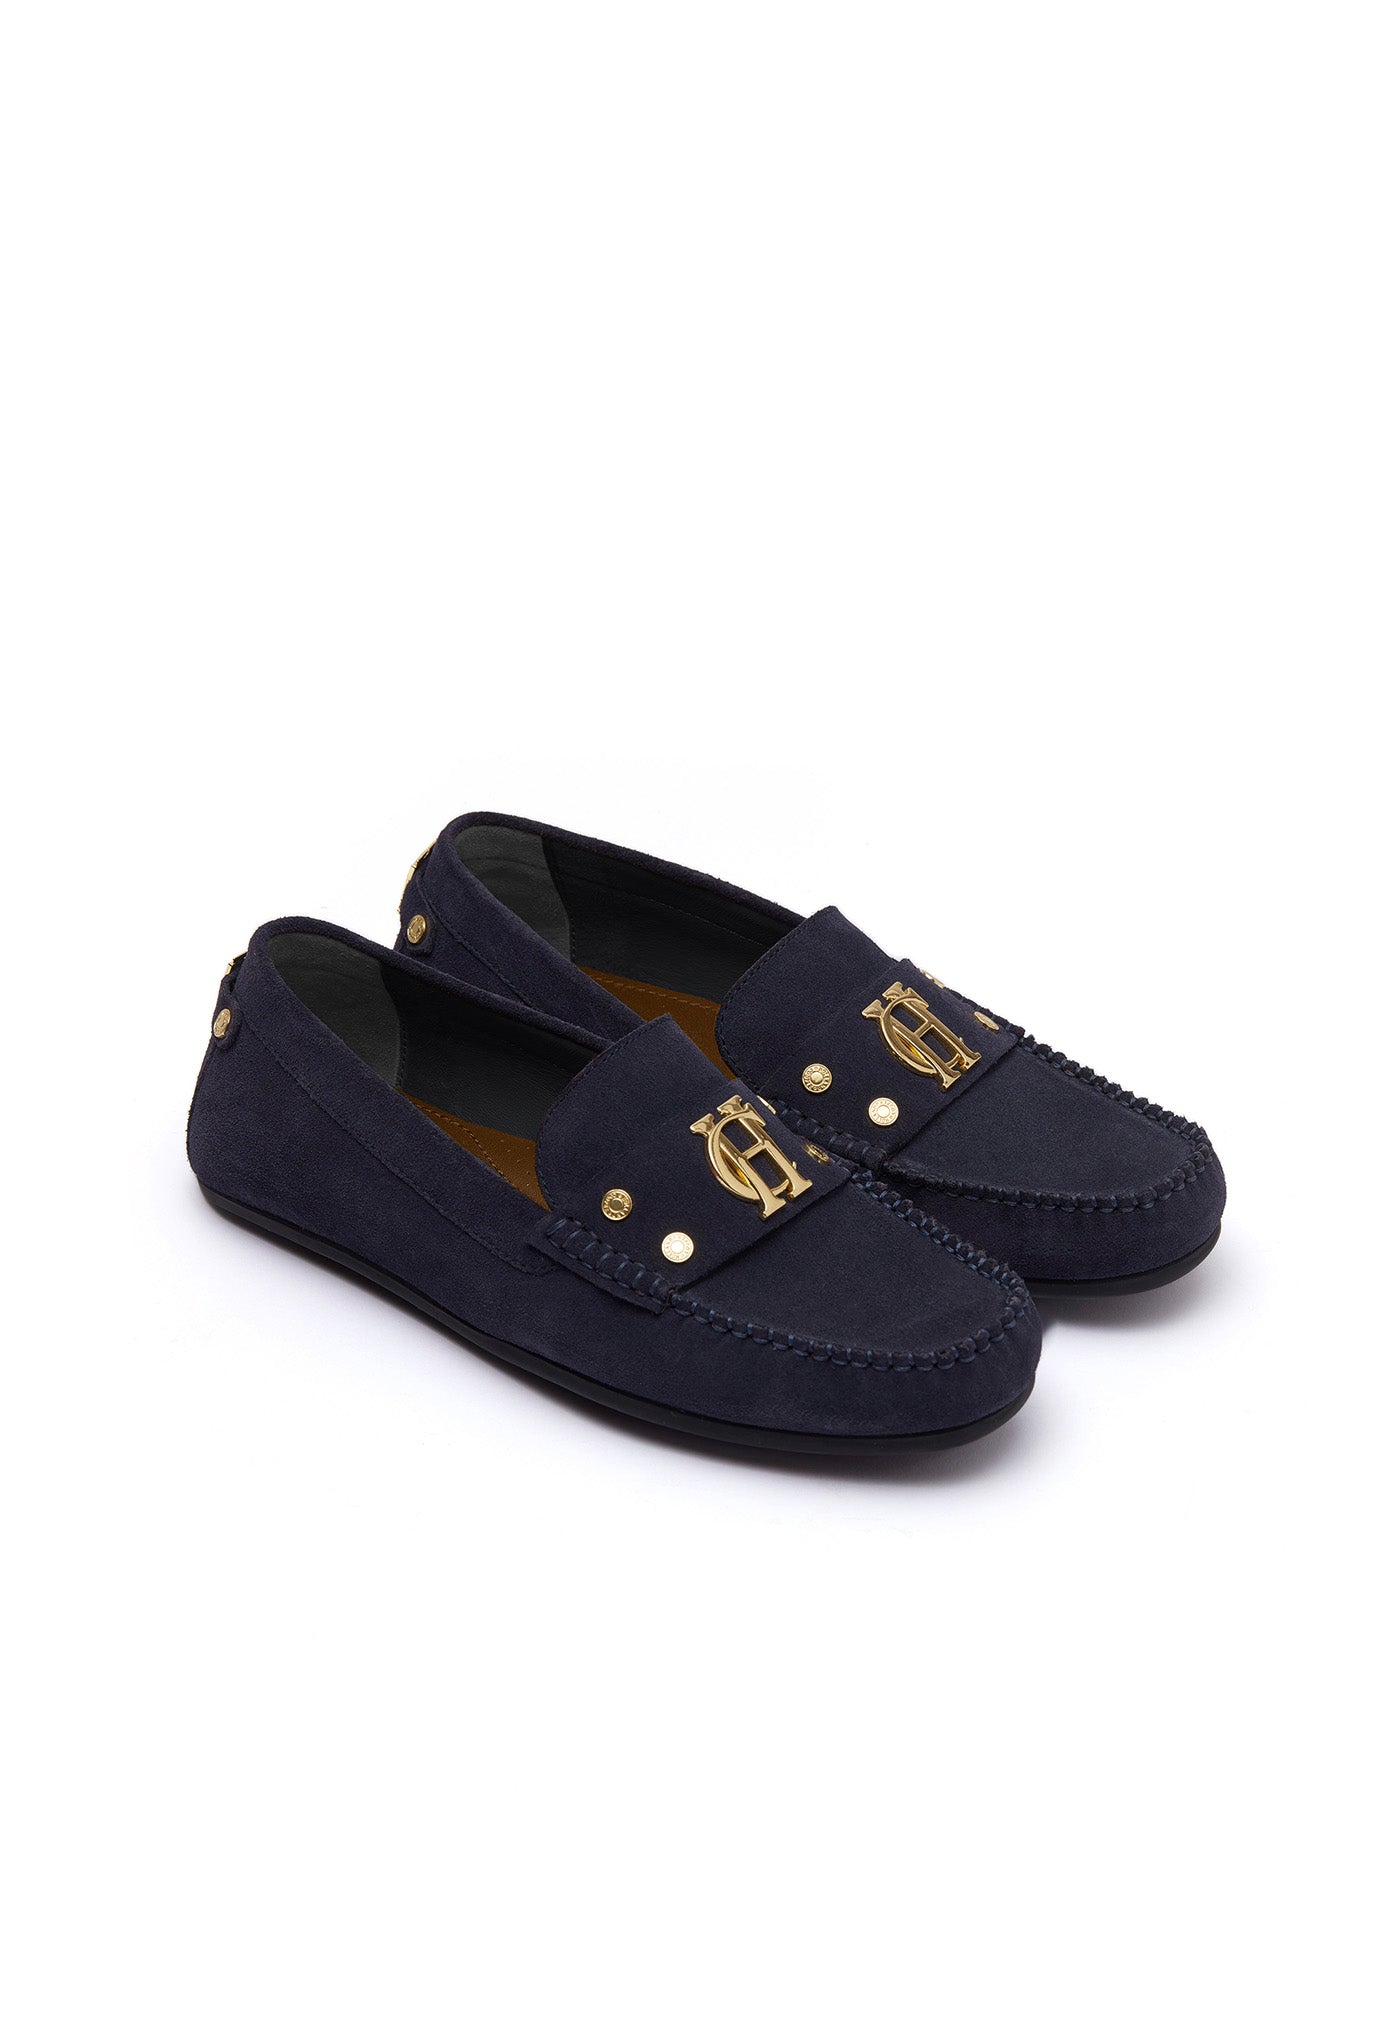 The Driving Loafer - Ink Navy sold by Angel Divine